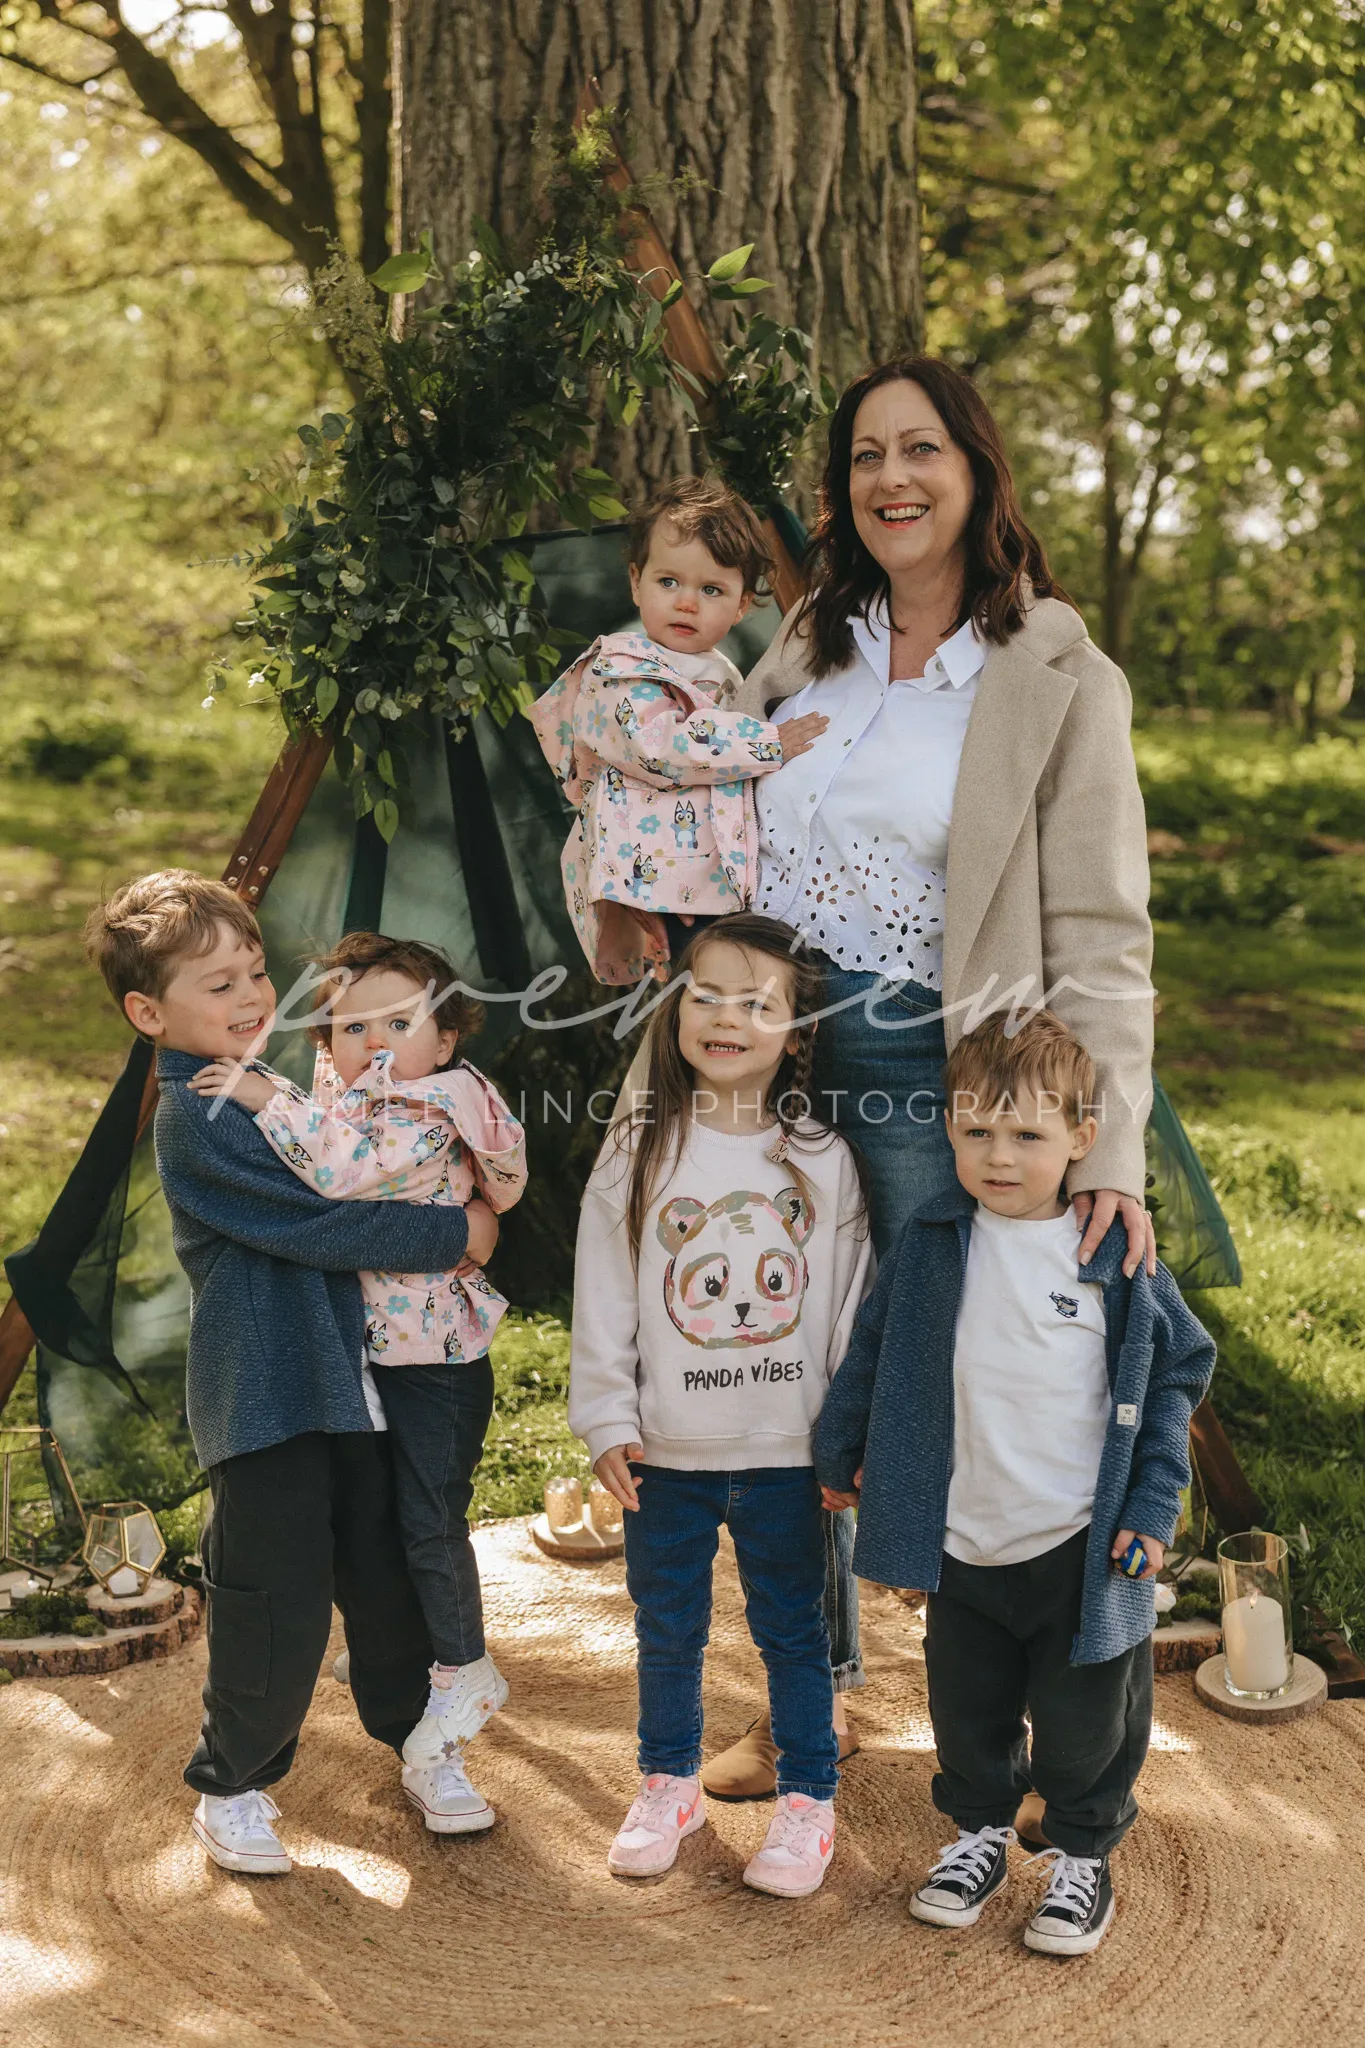 A joyful family portrait outdoors with a woman holding a baby, surrounded by four young children, three of which are peeking at the baby. they stand near a tree adorned with elegant greenery and flowers, under soft sunlight.